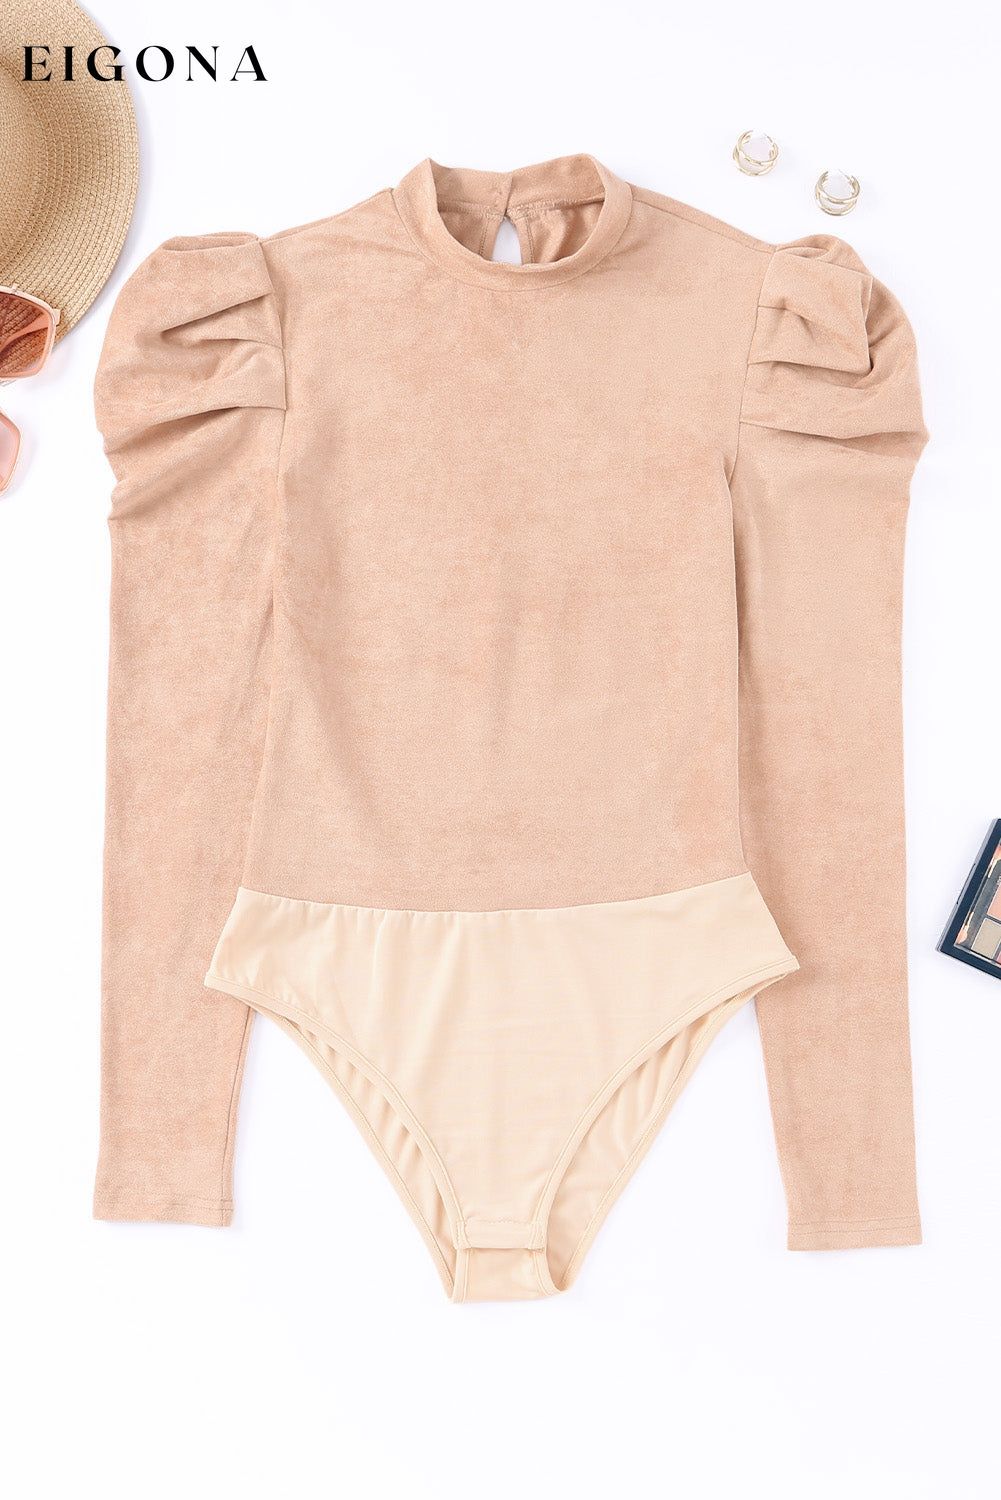 Brown Puff Sleeve Suede Bodysuit bodysu bodysuit bodysuits clothes Color Khaki DL Exclusive Occasion Daily Occasion Office Print Solid Color Season Fall & Autumn Sleeve Puff sleeve Style Elegant